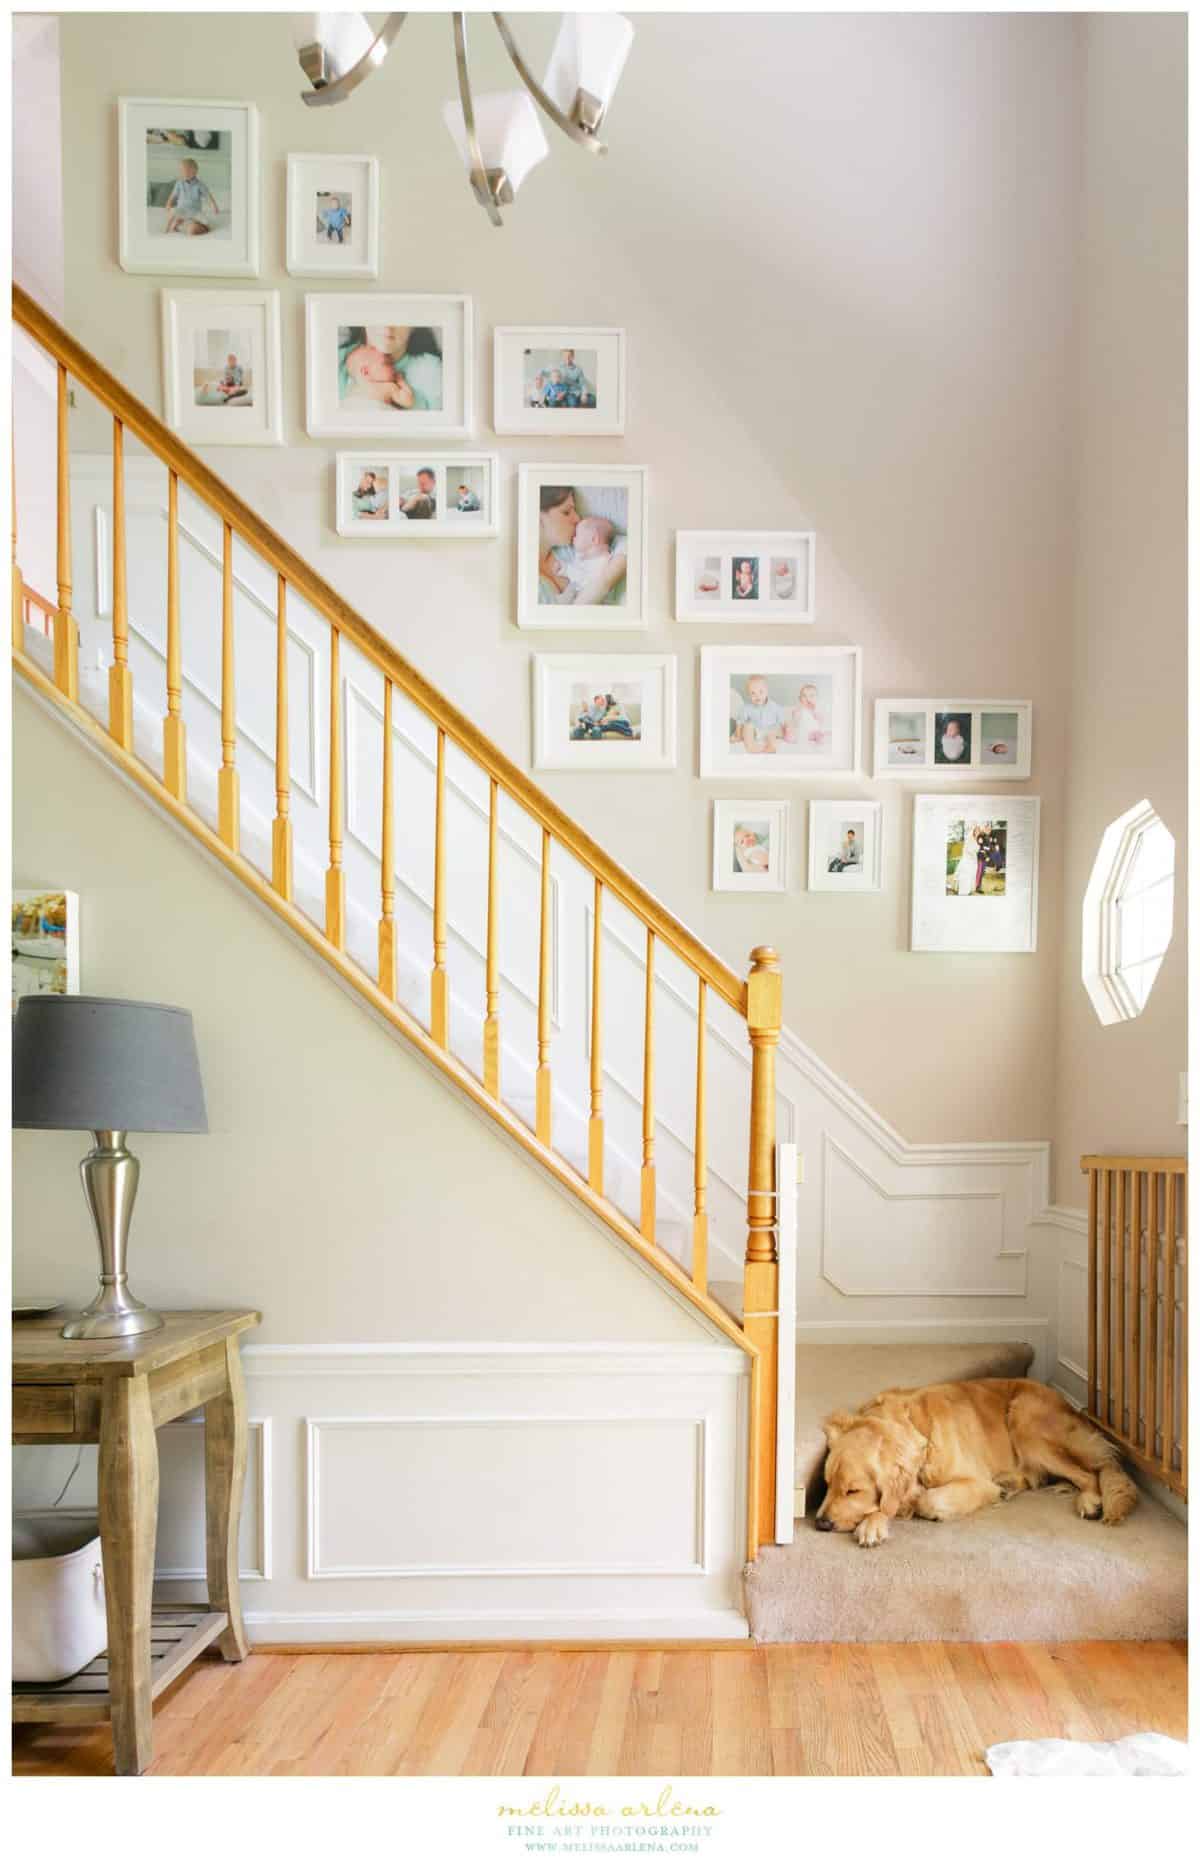 melissa-arlena-staircase-picture-wall-100